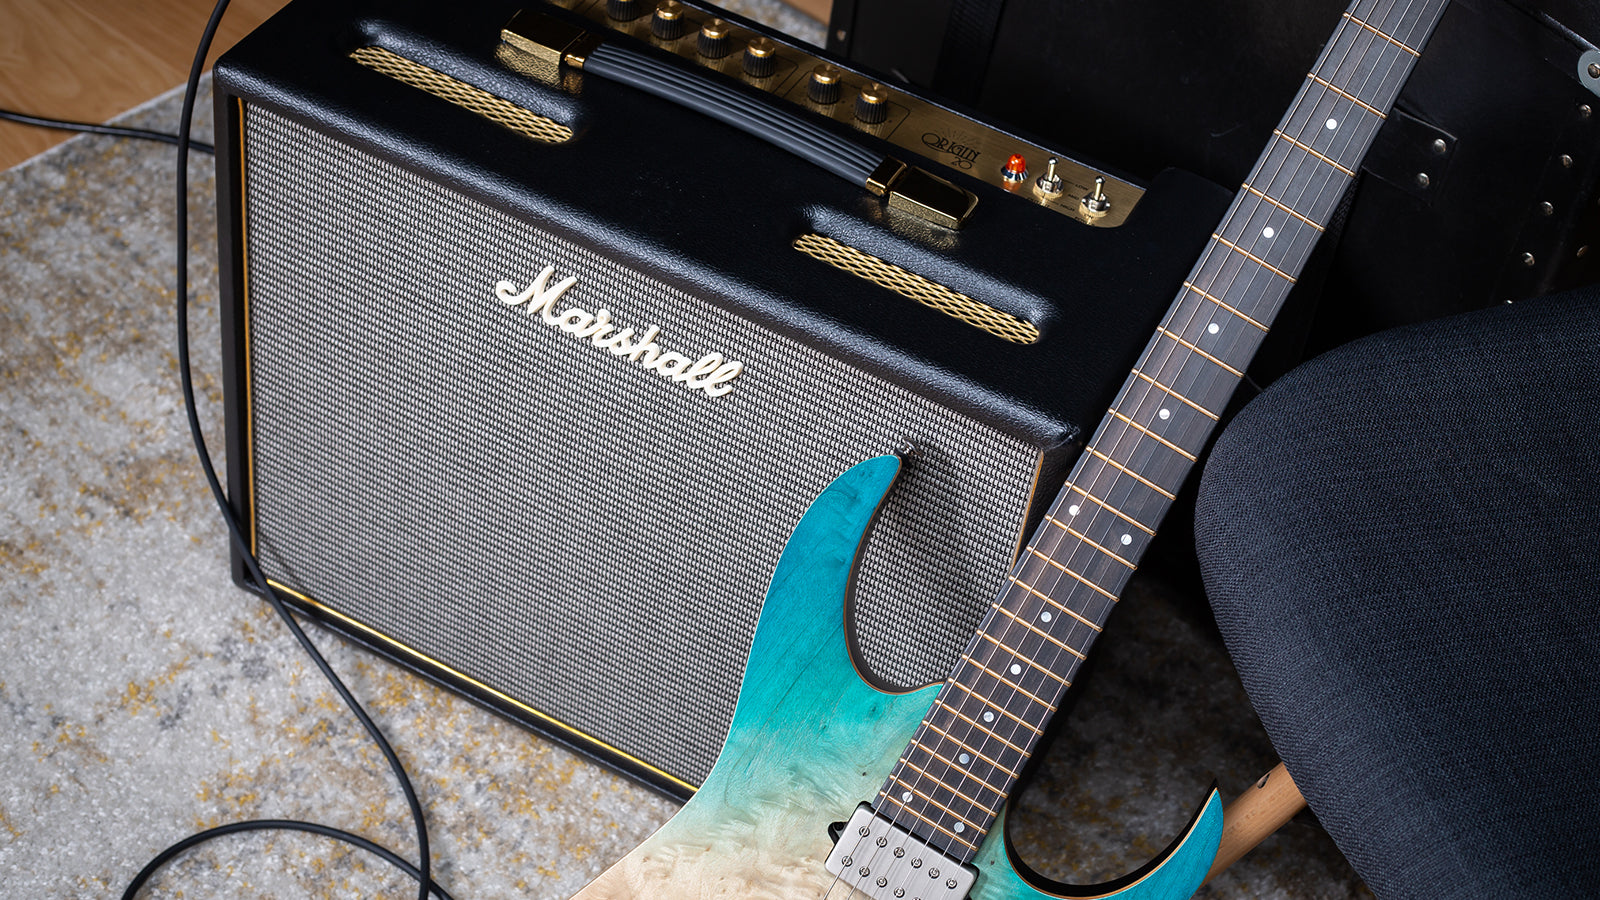 A Marshall amp with an electric guitar leaning on it